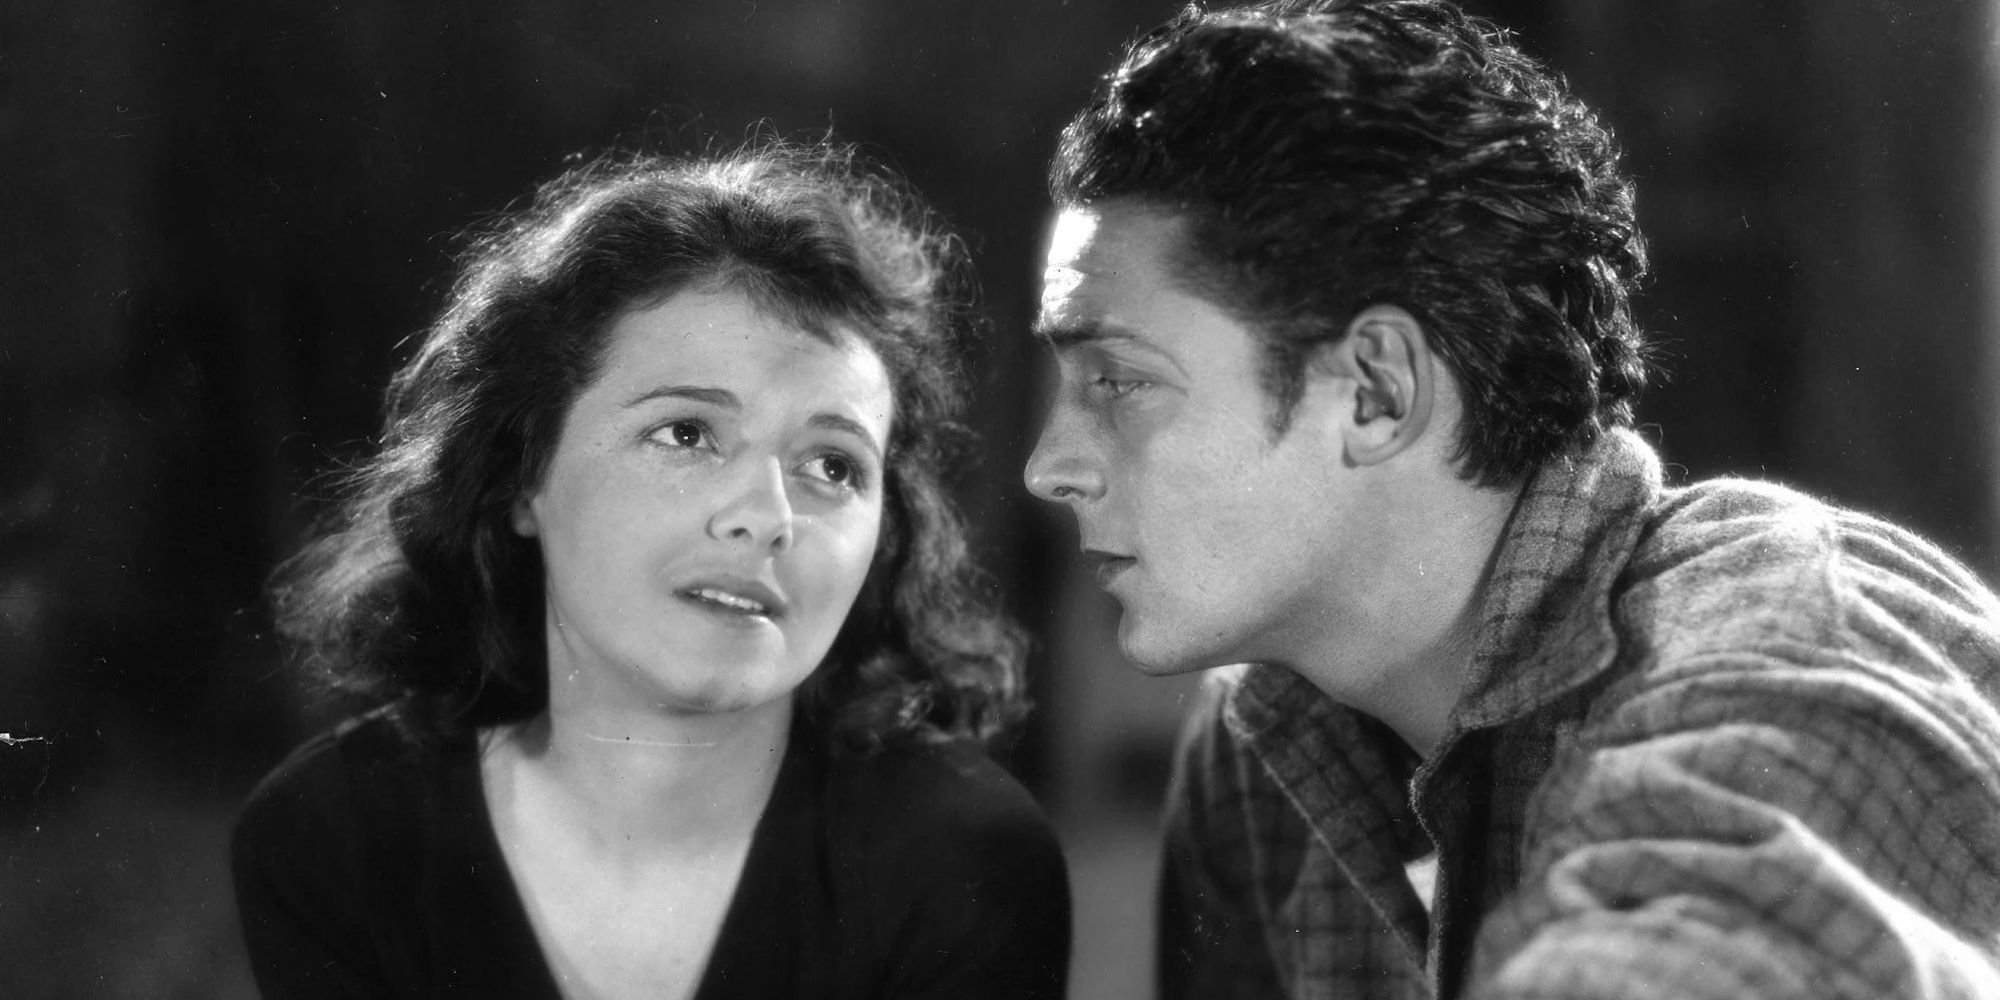 Janet Gaynor as Diane and Charles Farrell as Chico in 7th Heaven